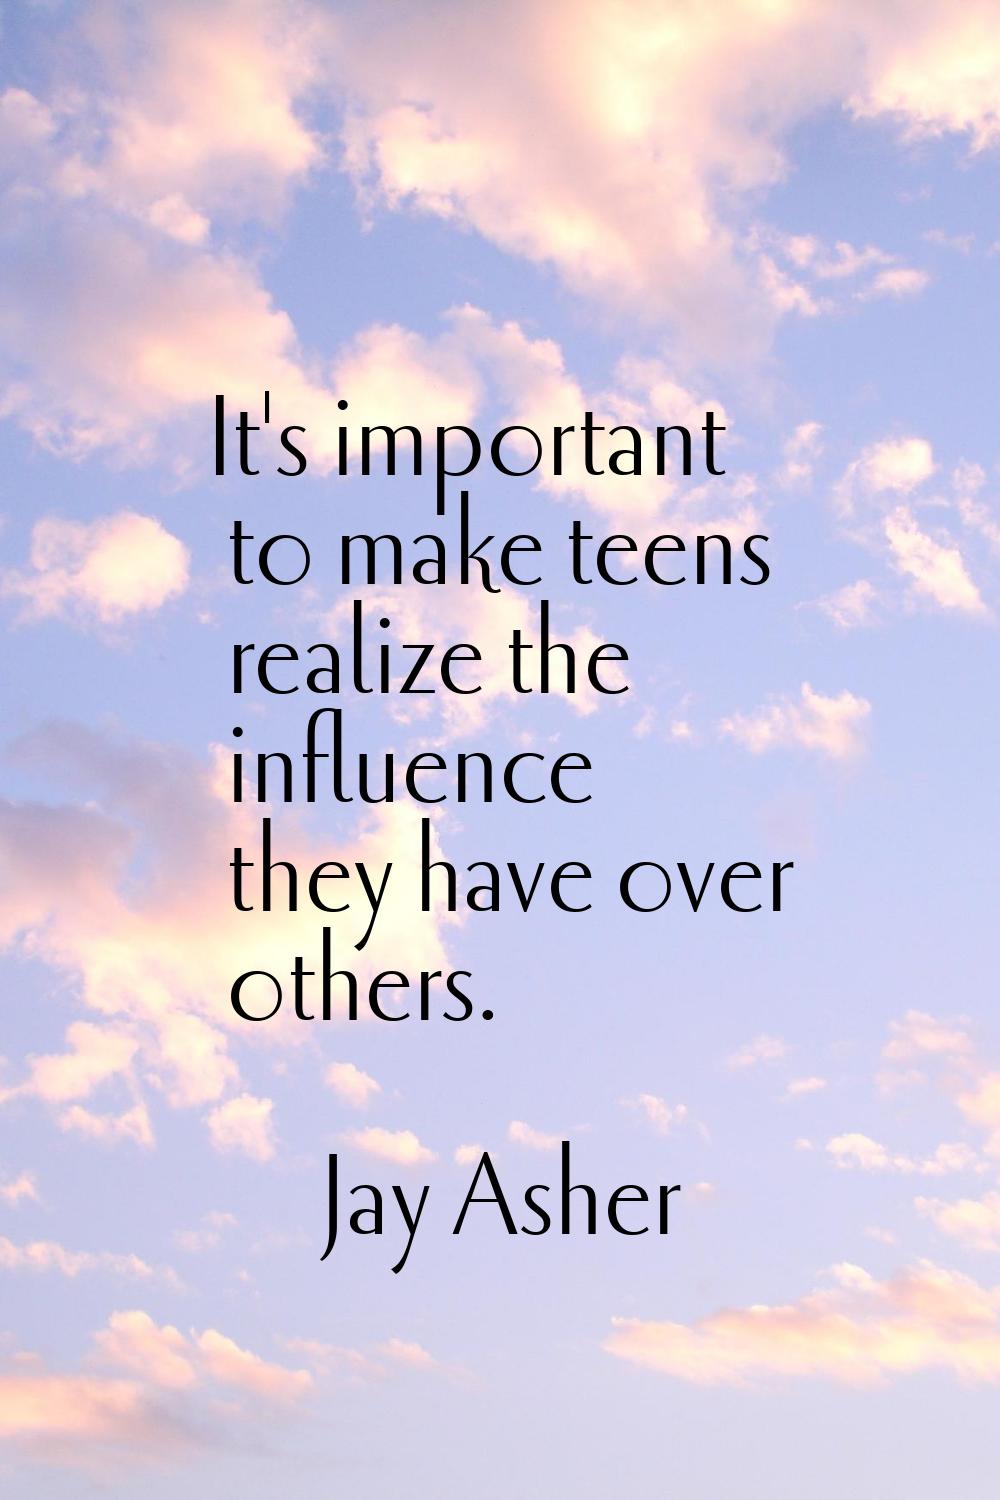 It's important to make teens realize the influence they have over others.